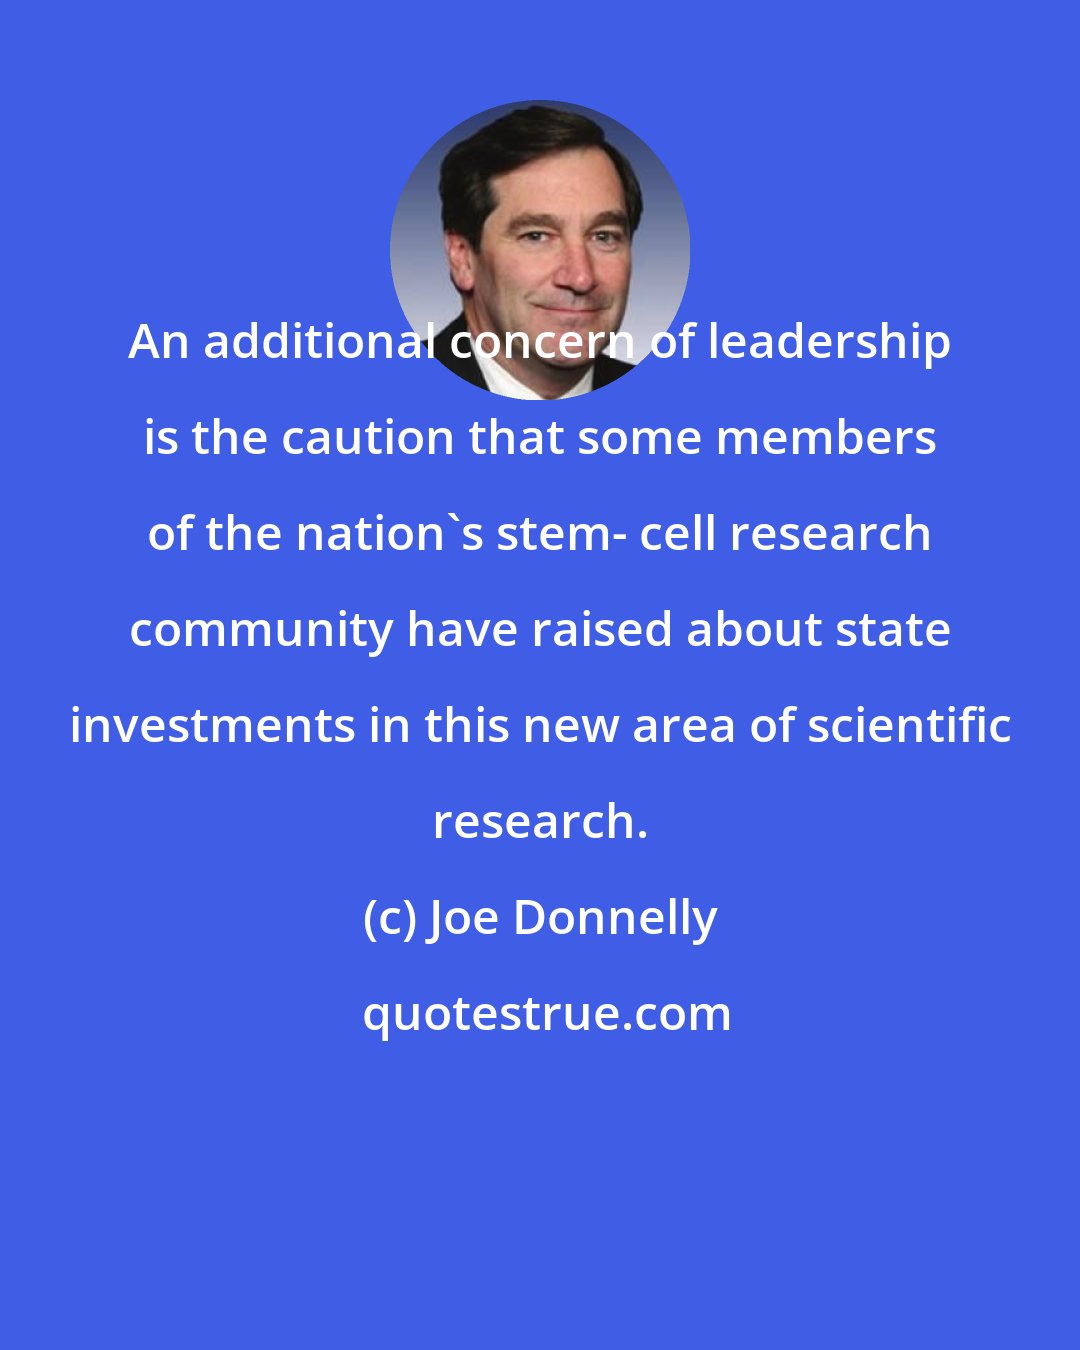 Joe Donnelly: An additional concern of leadership is the caution that some members of the nation's stem- cell research community have raised about state investments in this new area of scientific research.